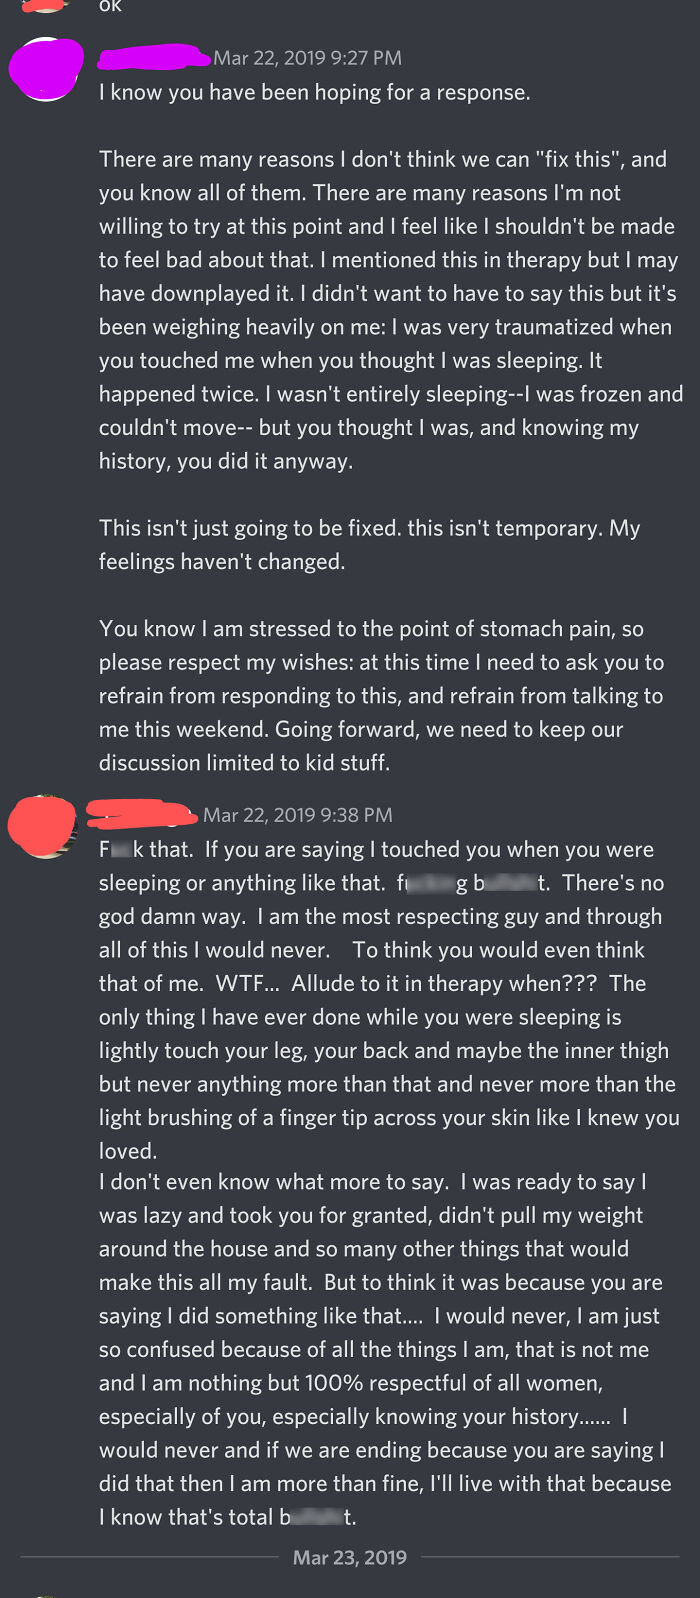 He Is "The Most Respecting Guy" While Explicitly Disrespecting My Request For Him To Refrain From Responding. This Is My Now Ex Husband Who Touched Me While He Thought I Was Sleeping, Knowing My History Of Sa While Sleeping. His Begging For Another Chance Was Triggering So I Tried To Tell Him